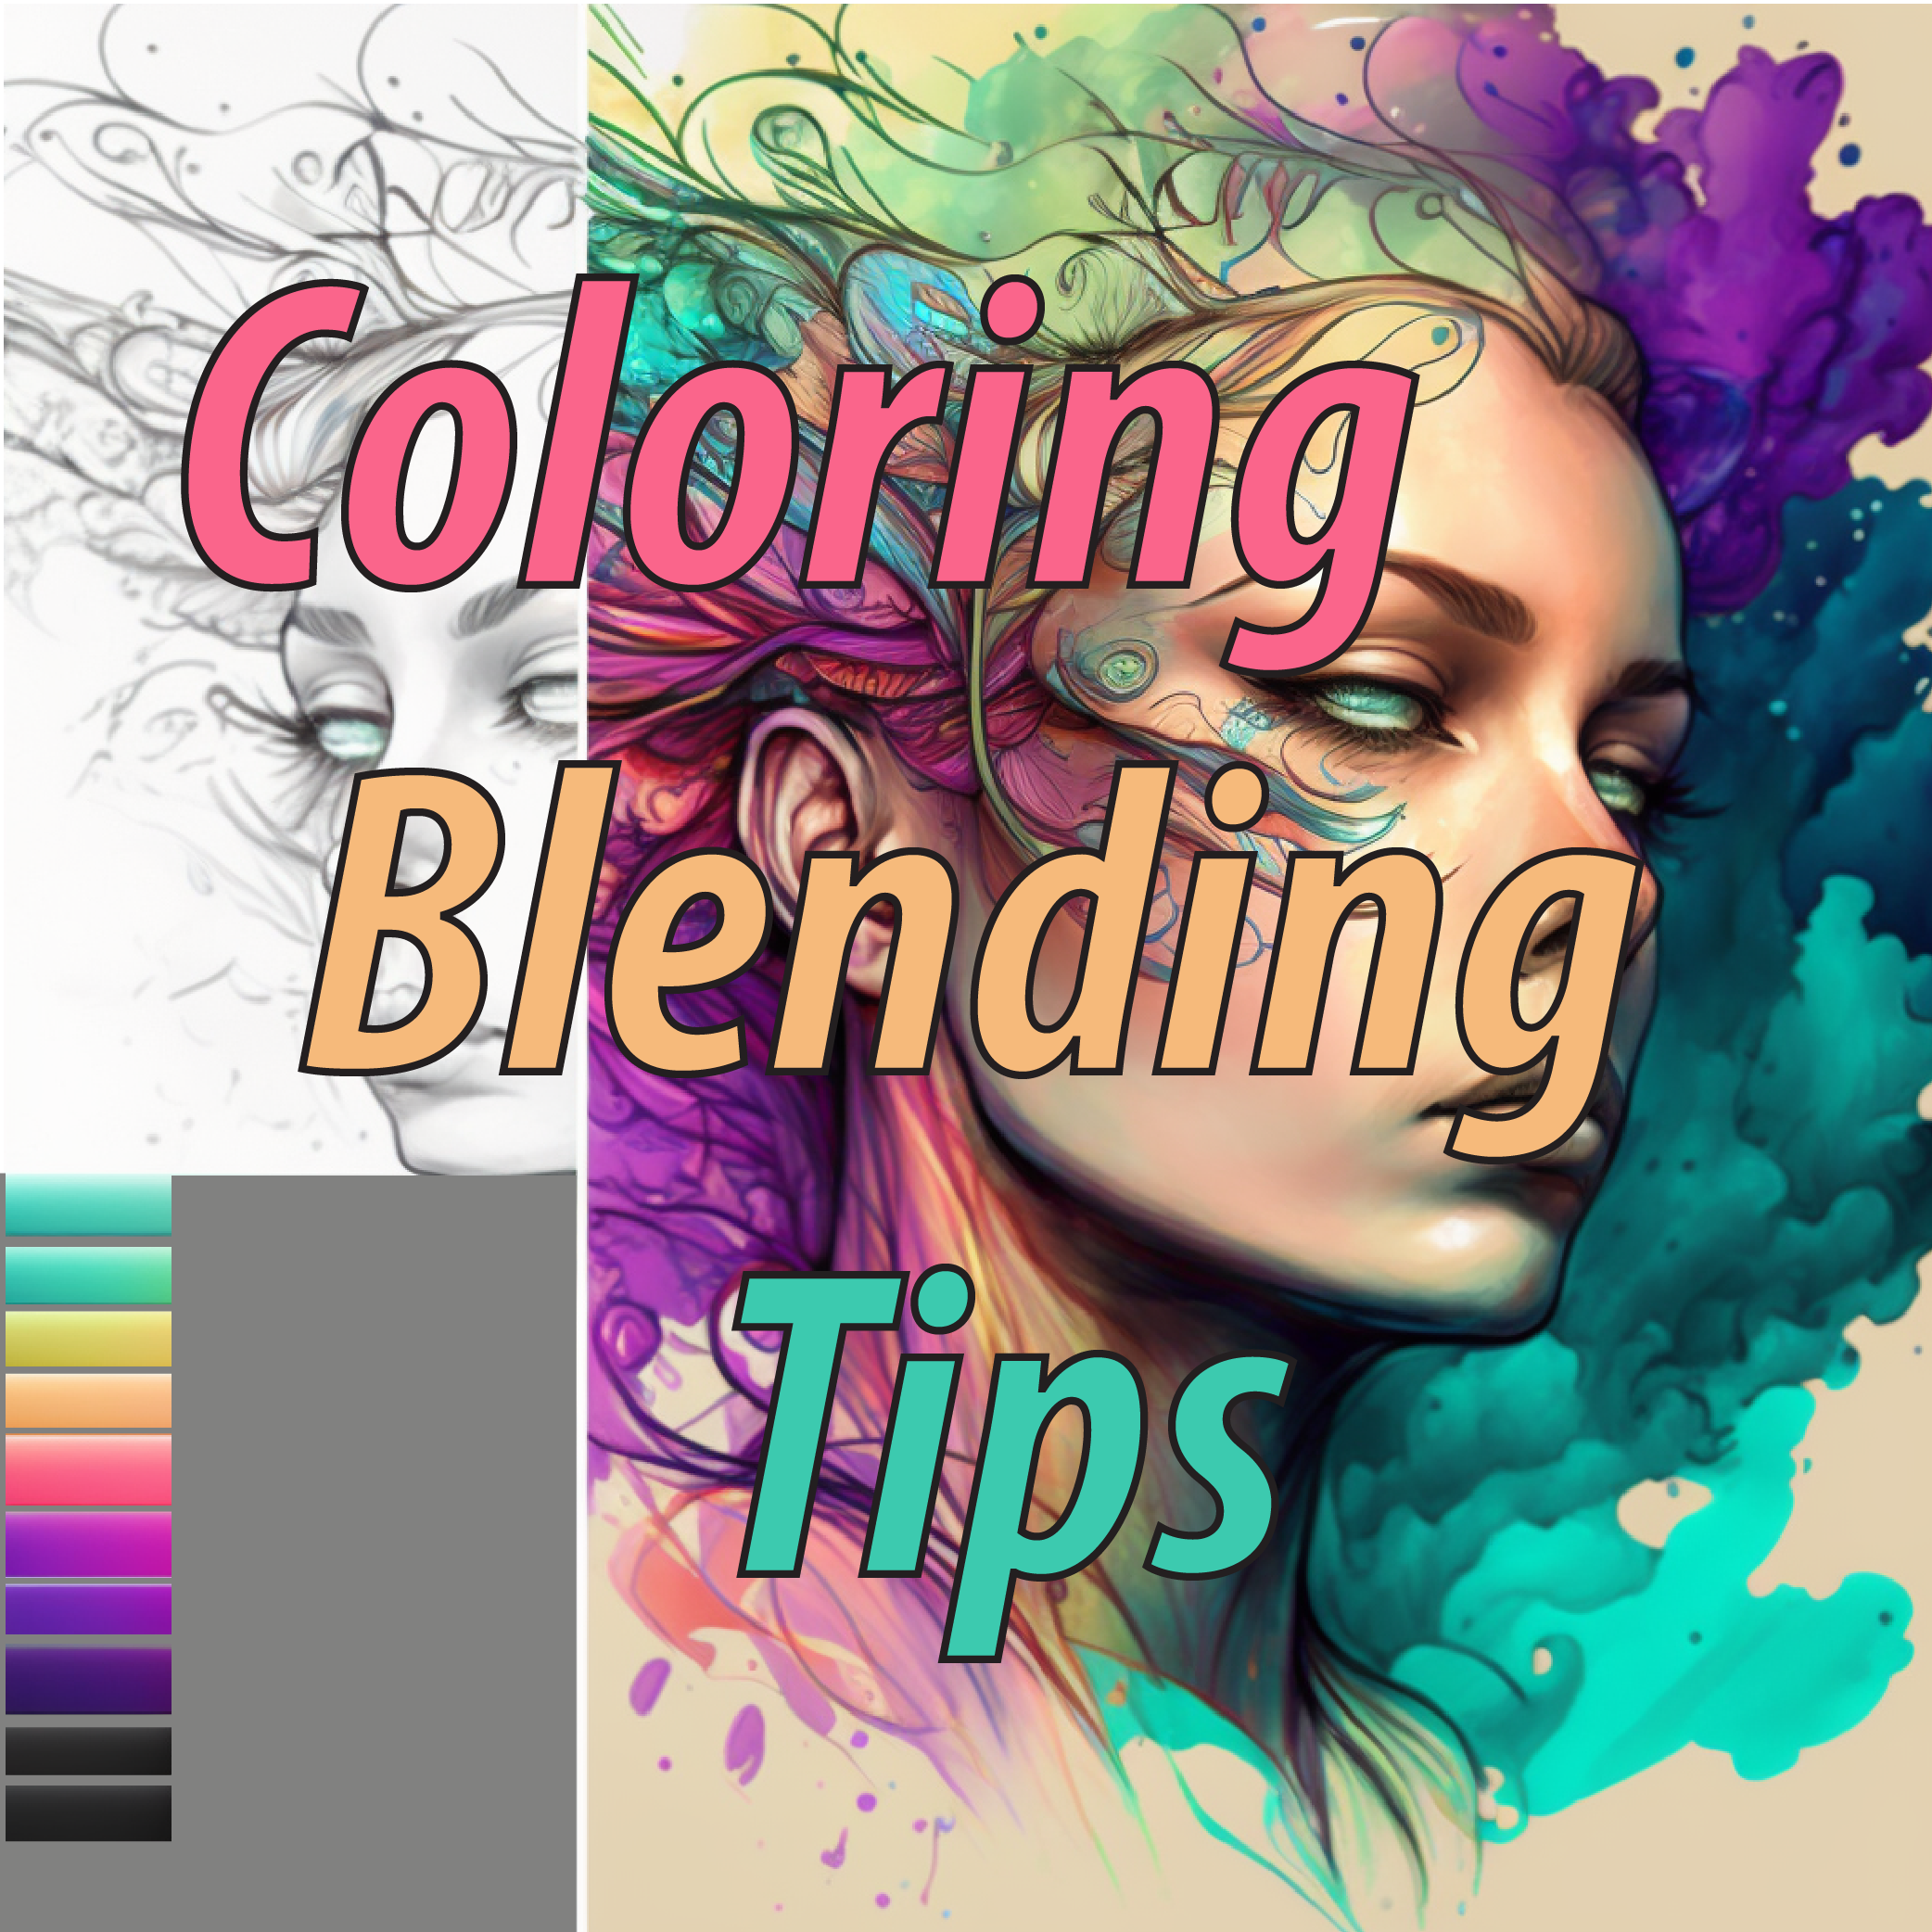 Coloring Blending Tips Most Won’t Tell You